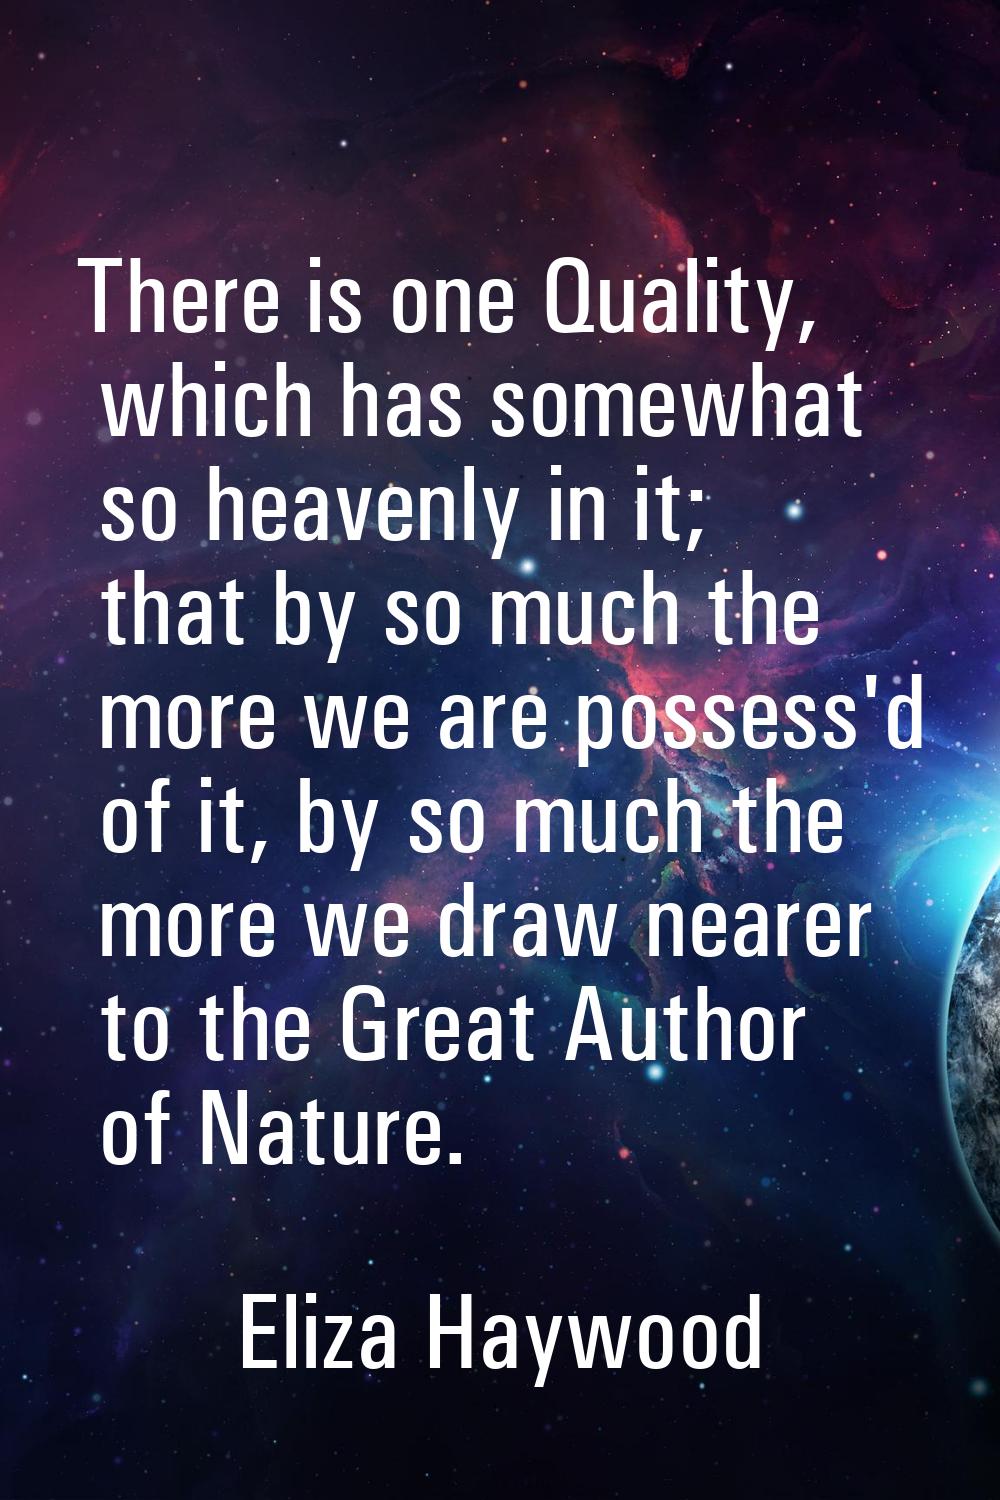 There is one Quality, which has somewhat so heavenly in it; that by so much the more we are possess